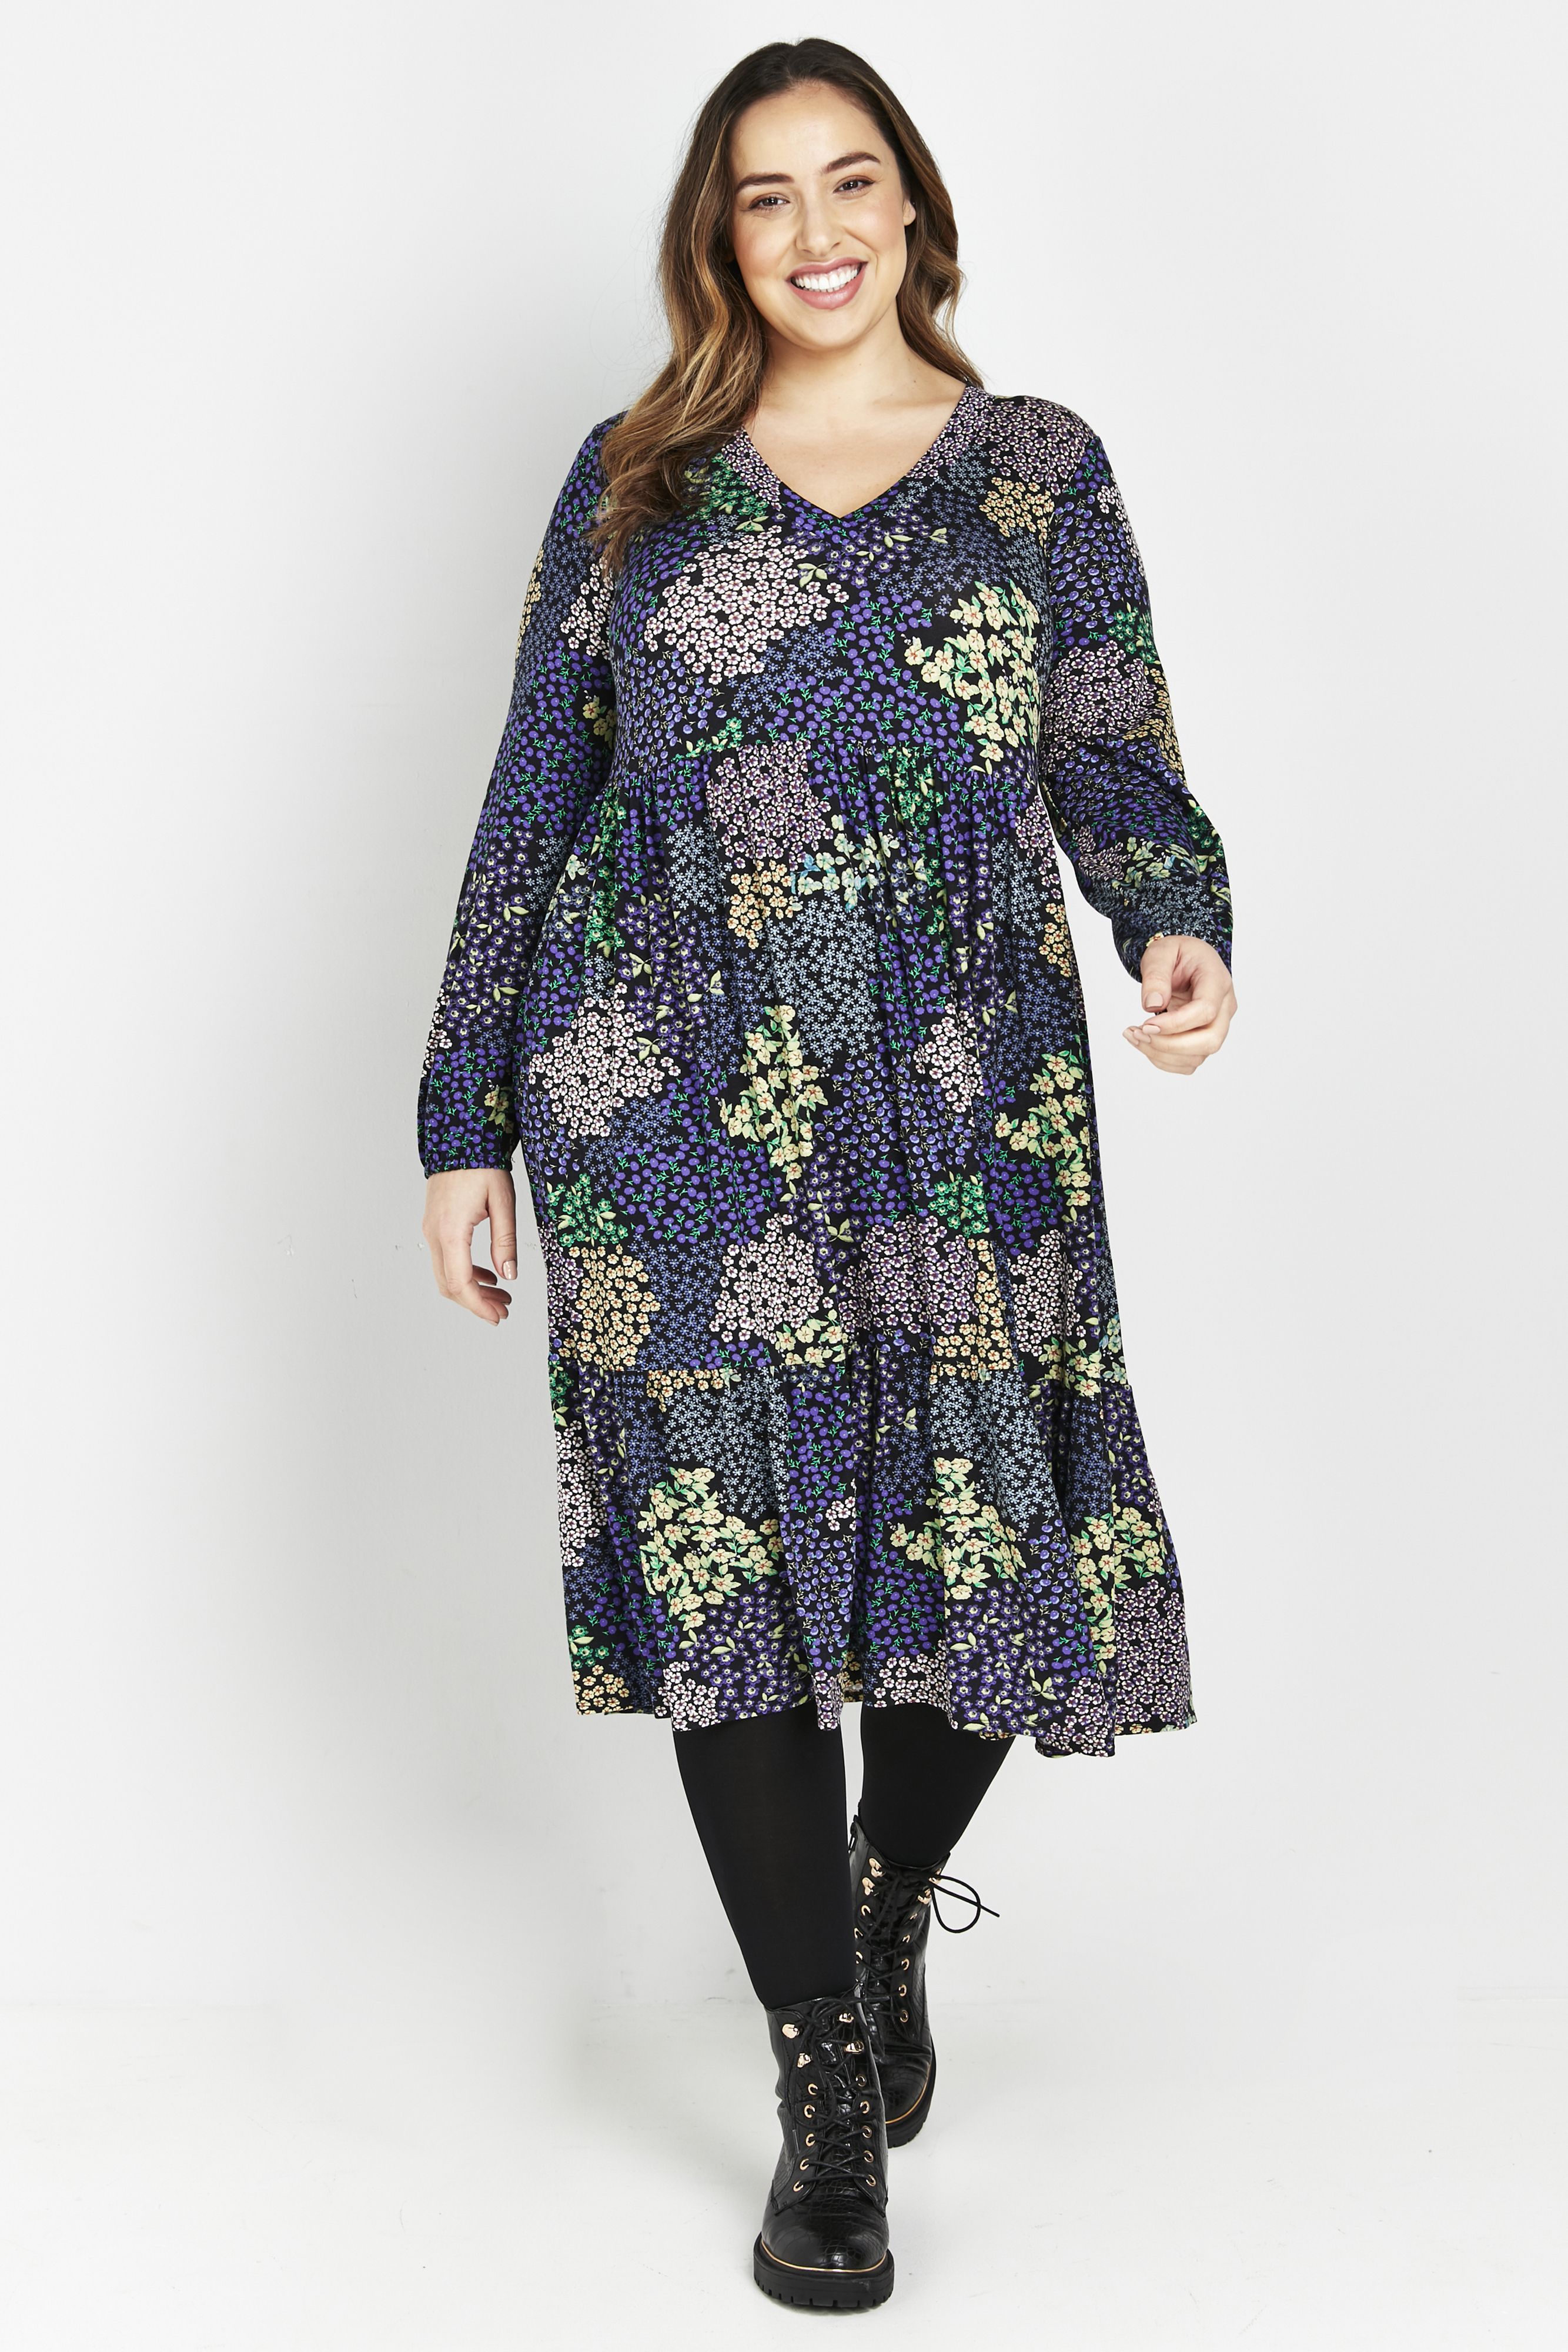 Flirt with florals this season in the cute Patchwork Floral Tiered Dress. A cute patchwork print will bring a pop of colour to your everyday wardrobe, whilst a relaxed floaty fit will have you wearing it on-repeat. Key Features Include: - V-neckline - Long sleeves - Functional side pockets - Relaxed fit - Midi length tiered skirt Style with tights and heeled ankle boots for a playful & effortless everyday look.